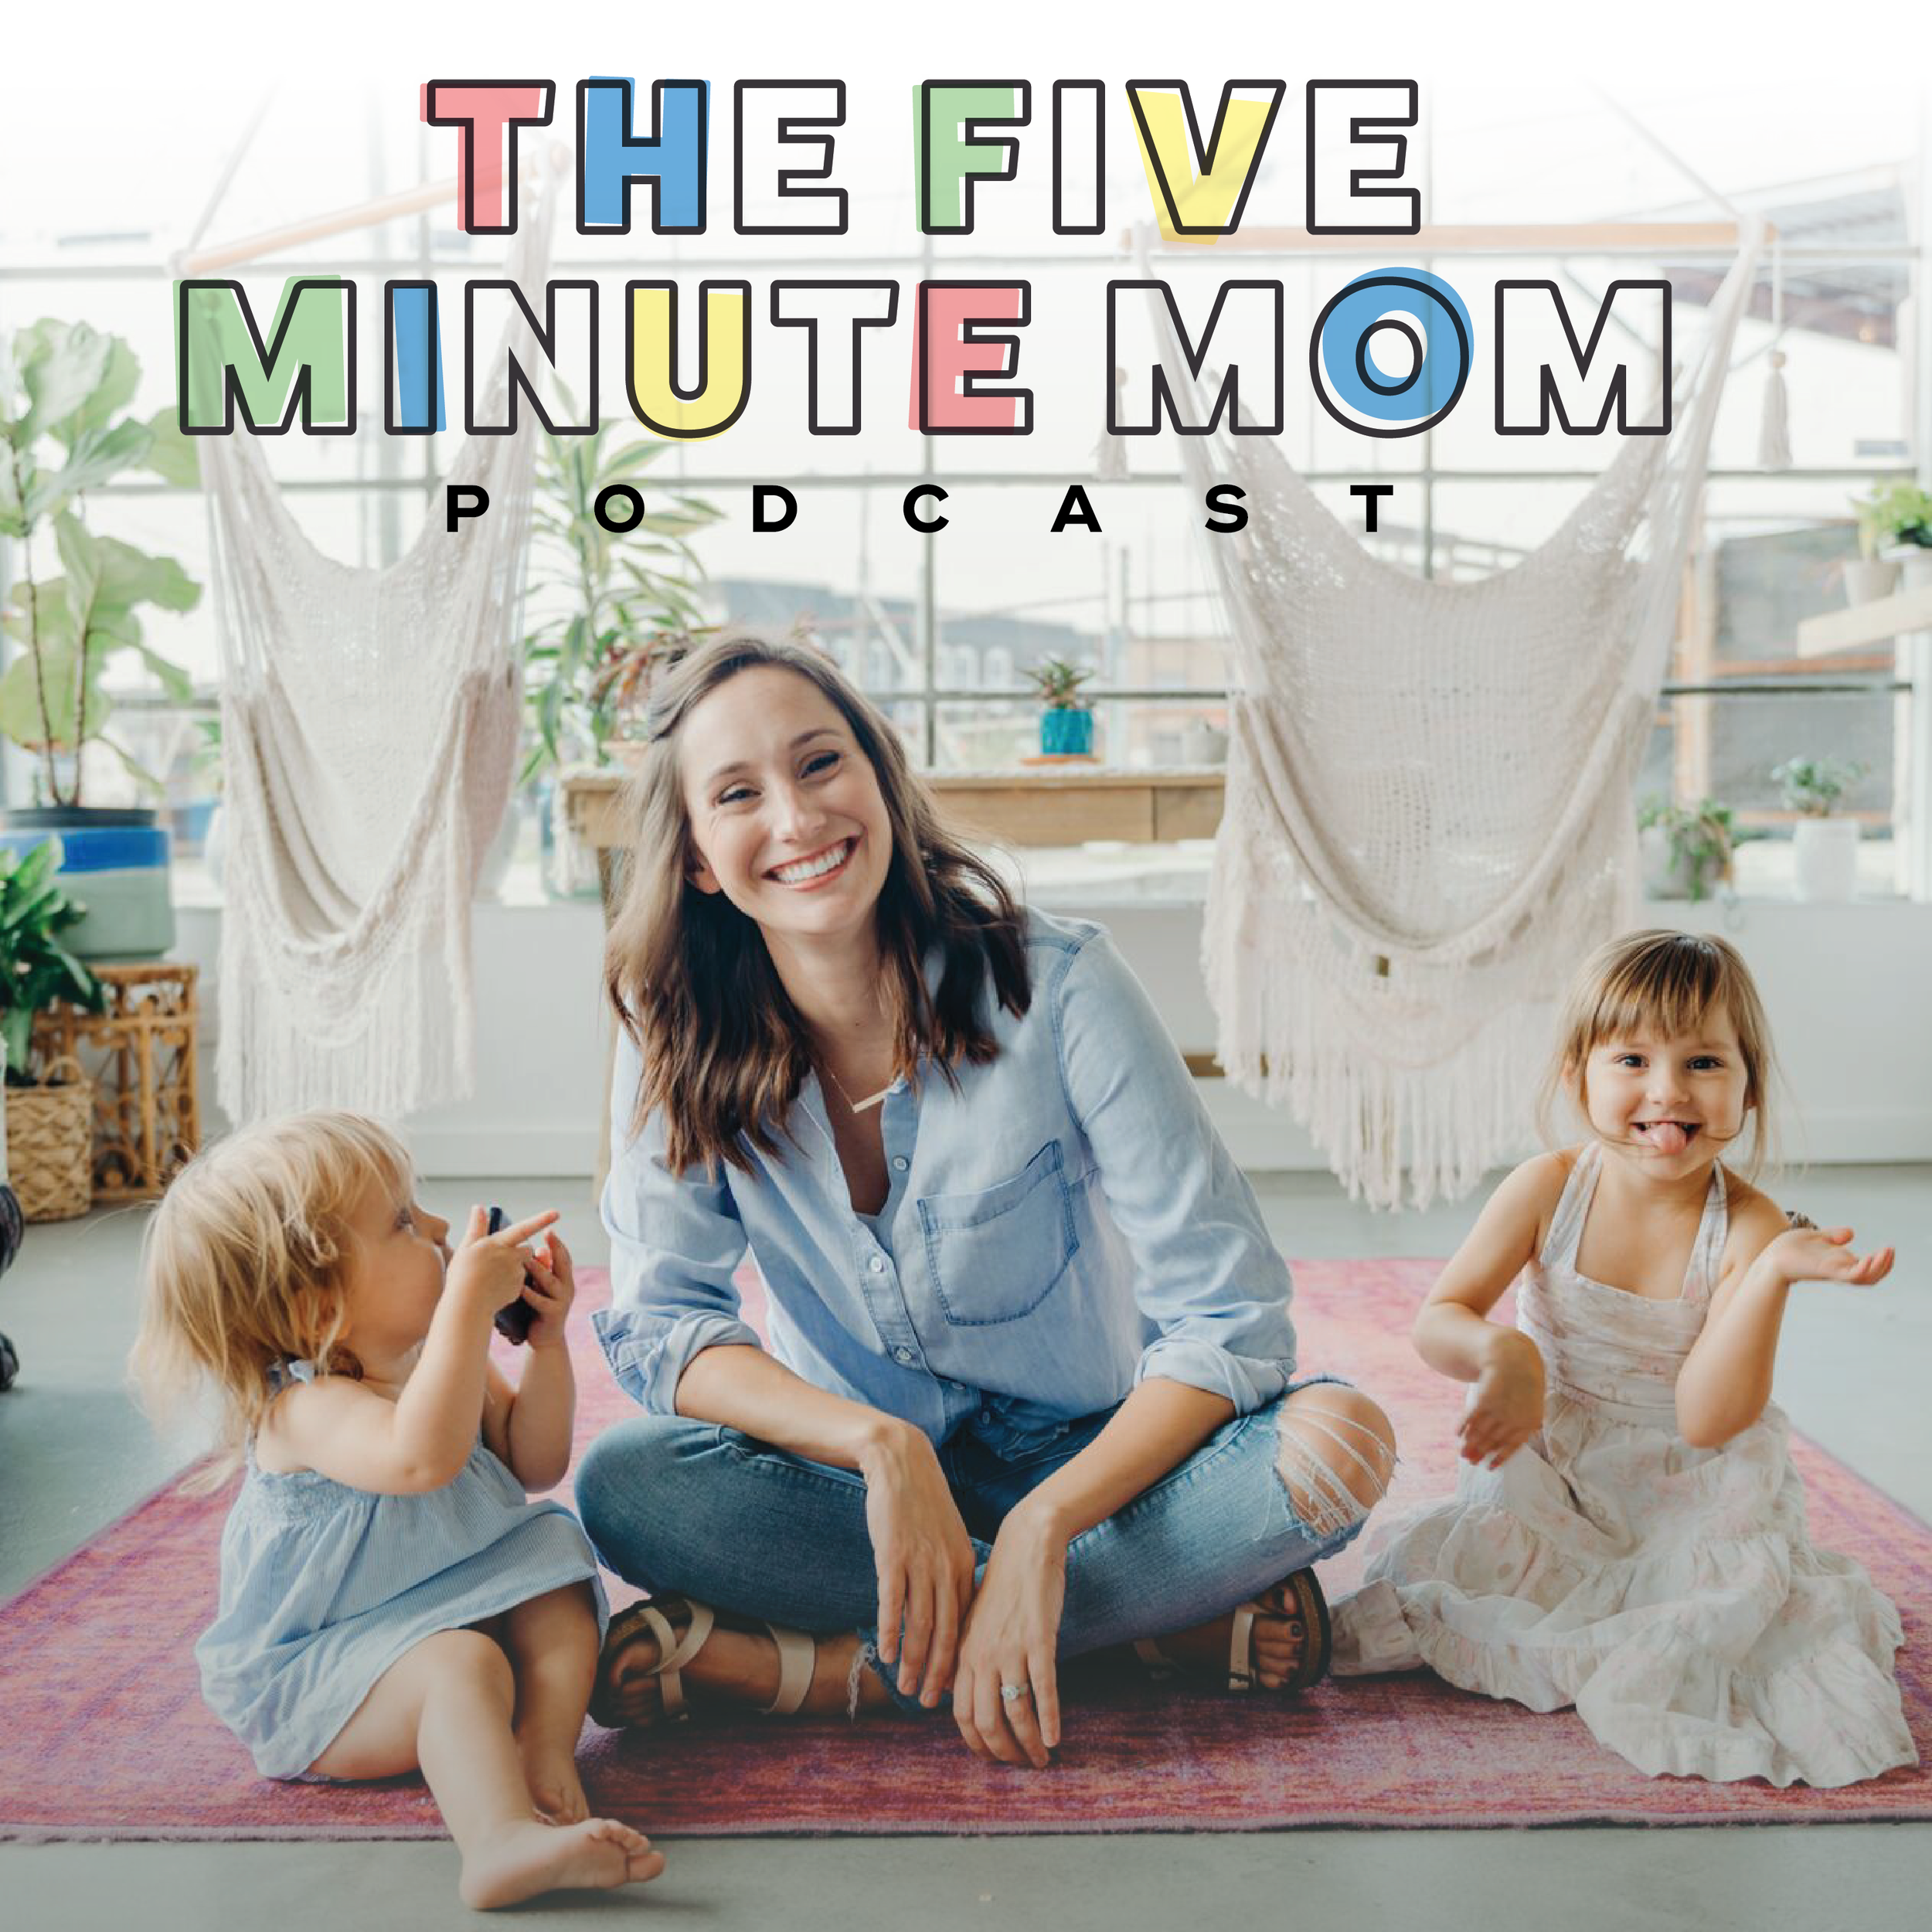 The Five Minute Mom Podcast